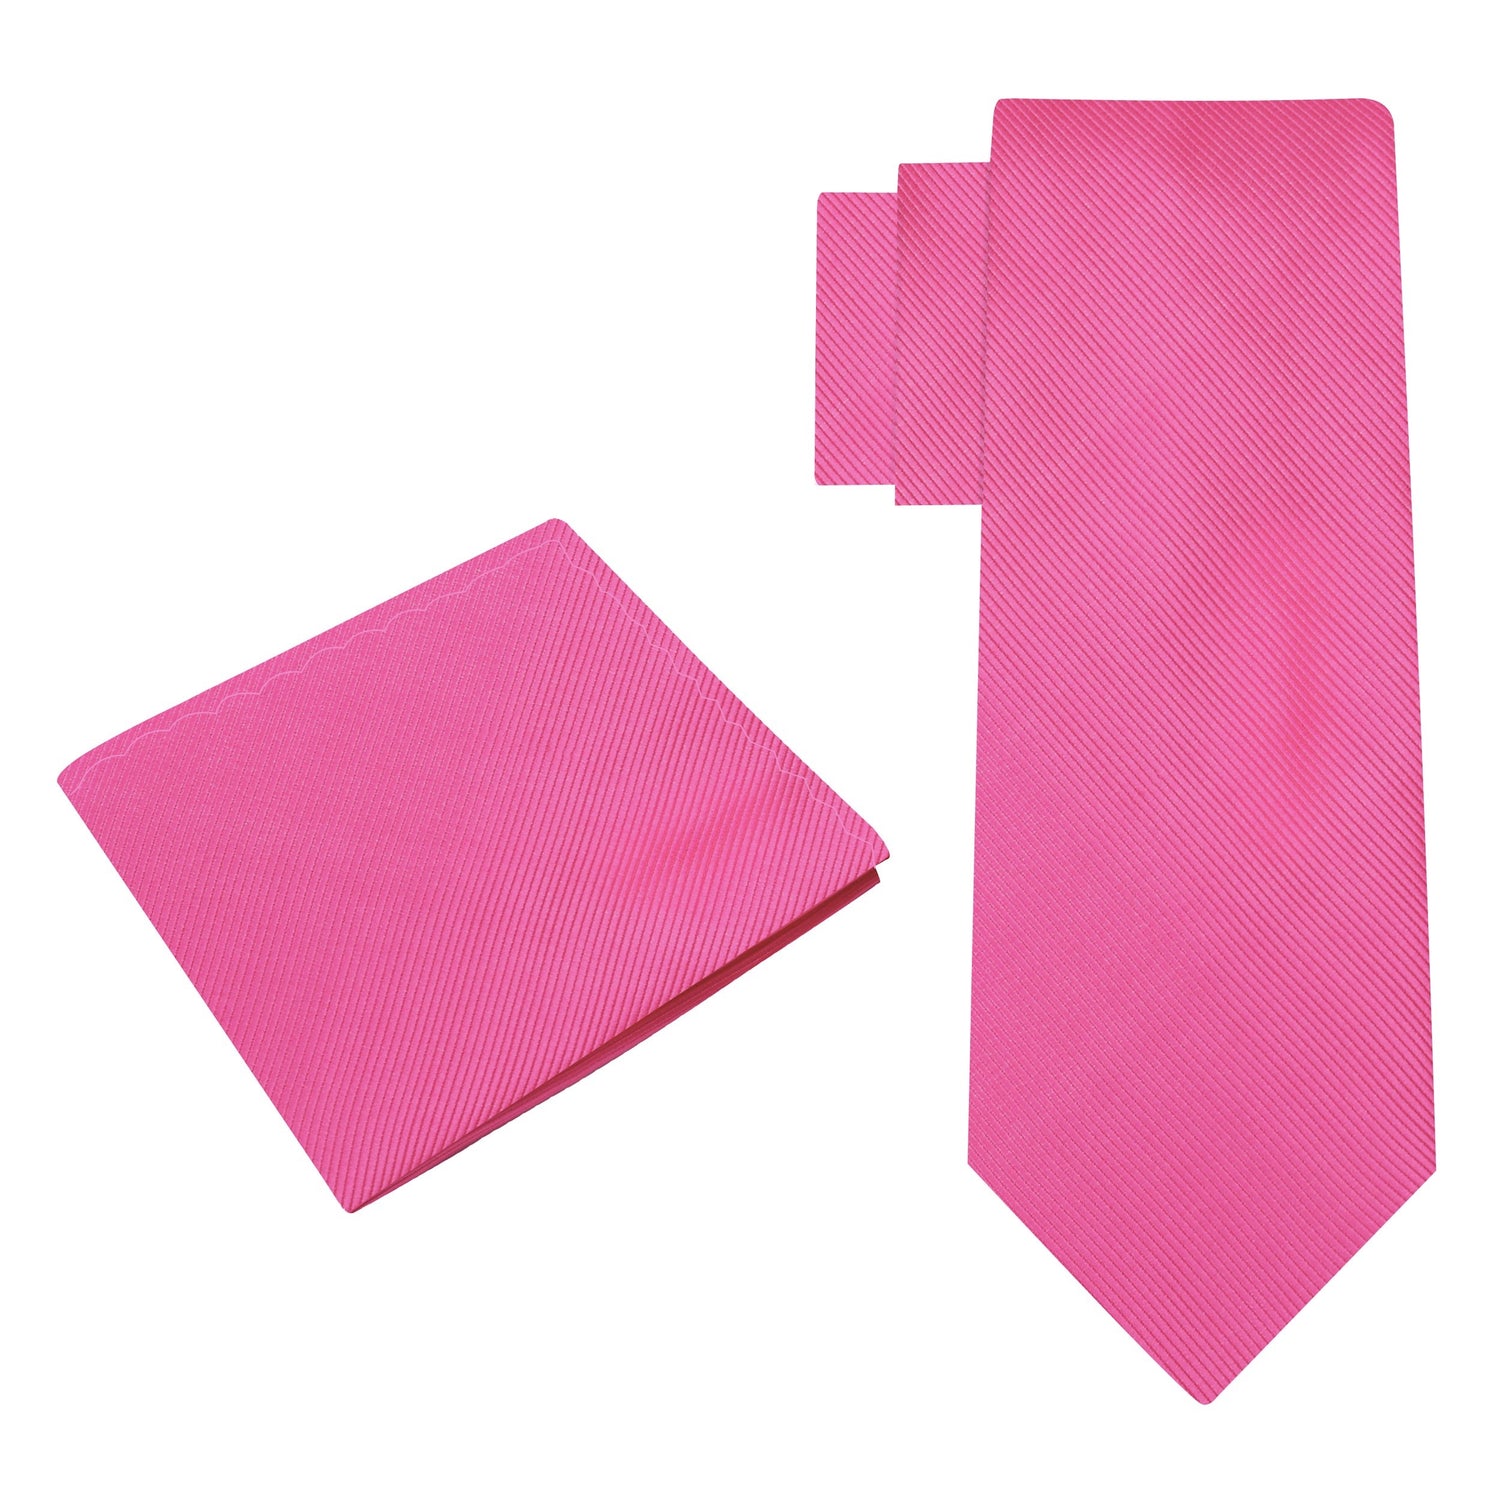 Alt View: Solid Pink Tie and Matching Square